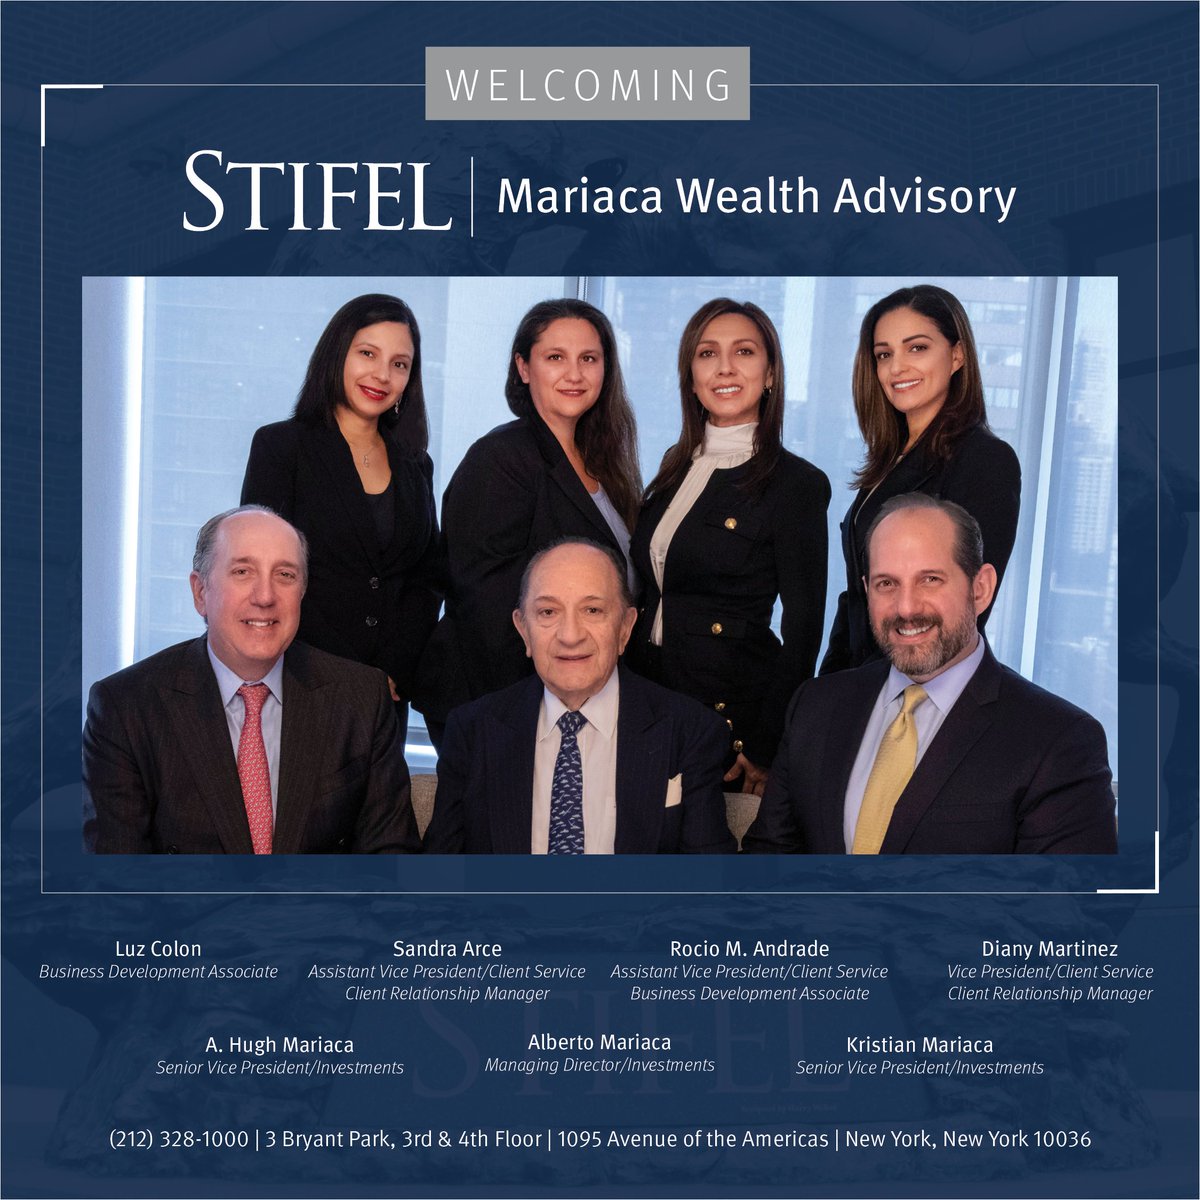 Join us in welcoming Mariaca Wealth Advisory to our private client group office in New York! Learn more about why they chose Stifel here: choosestifel.com #ChooseStifel